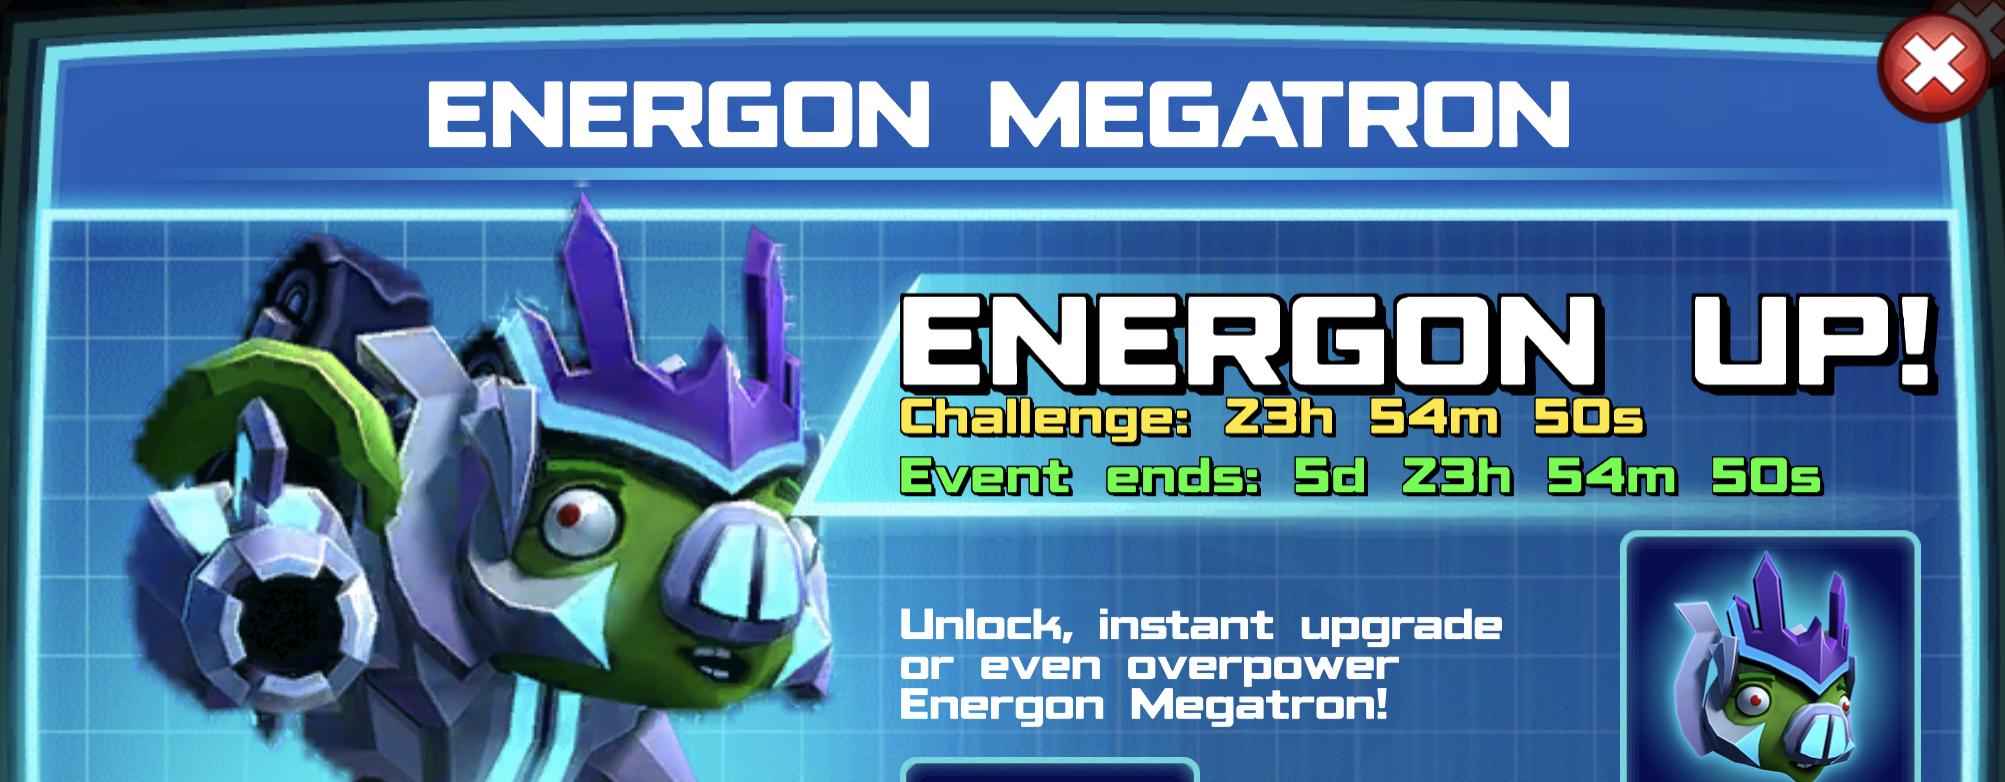 The event banner for Energon Megatron